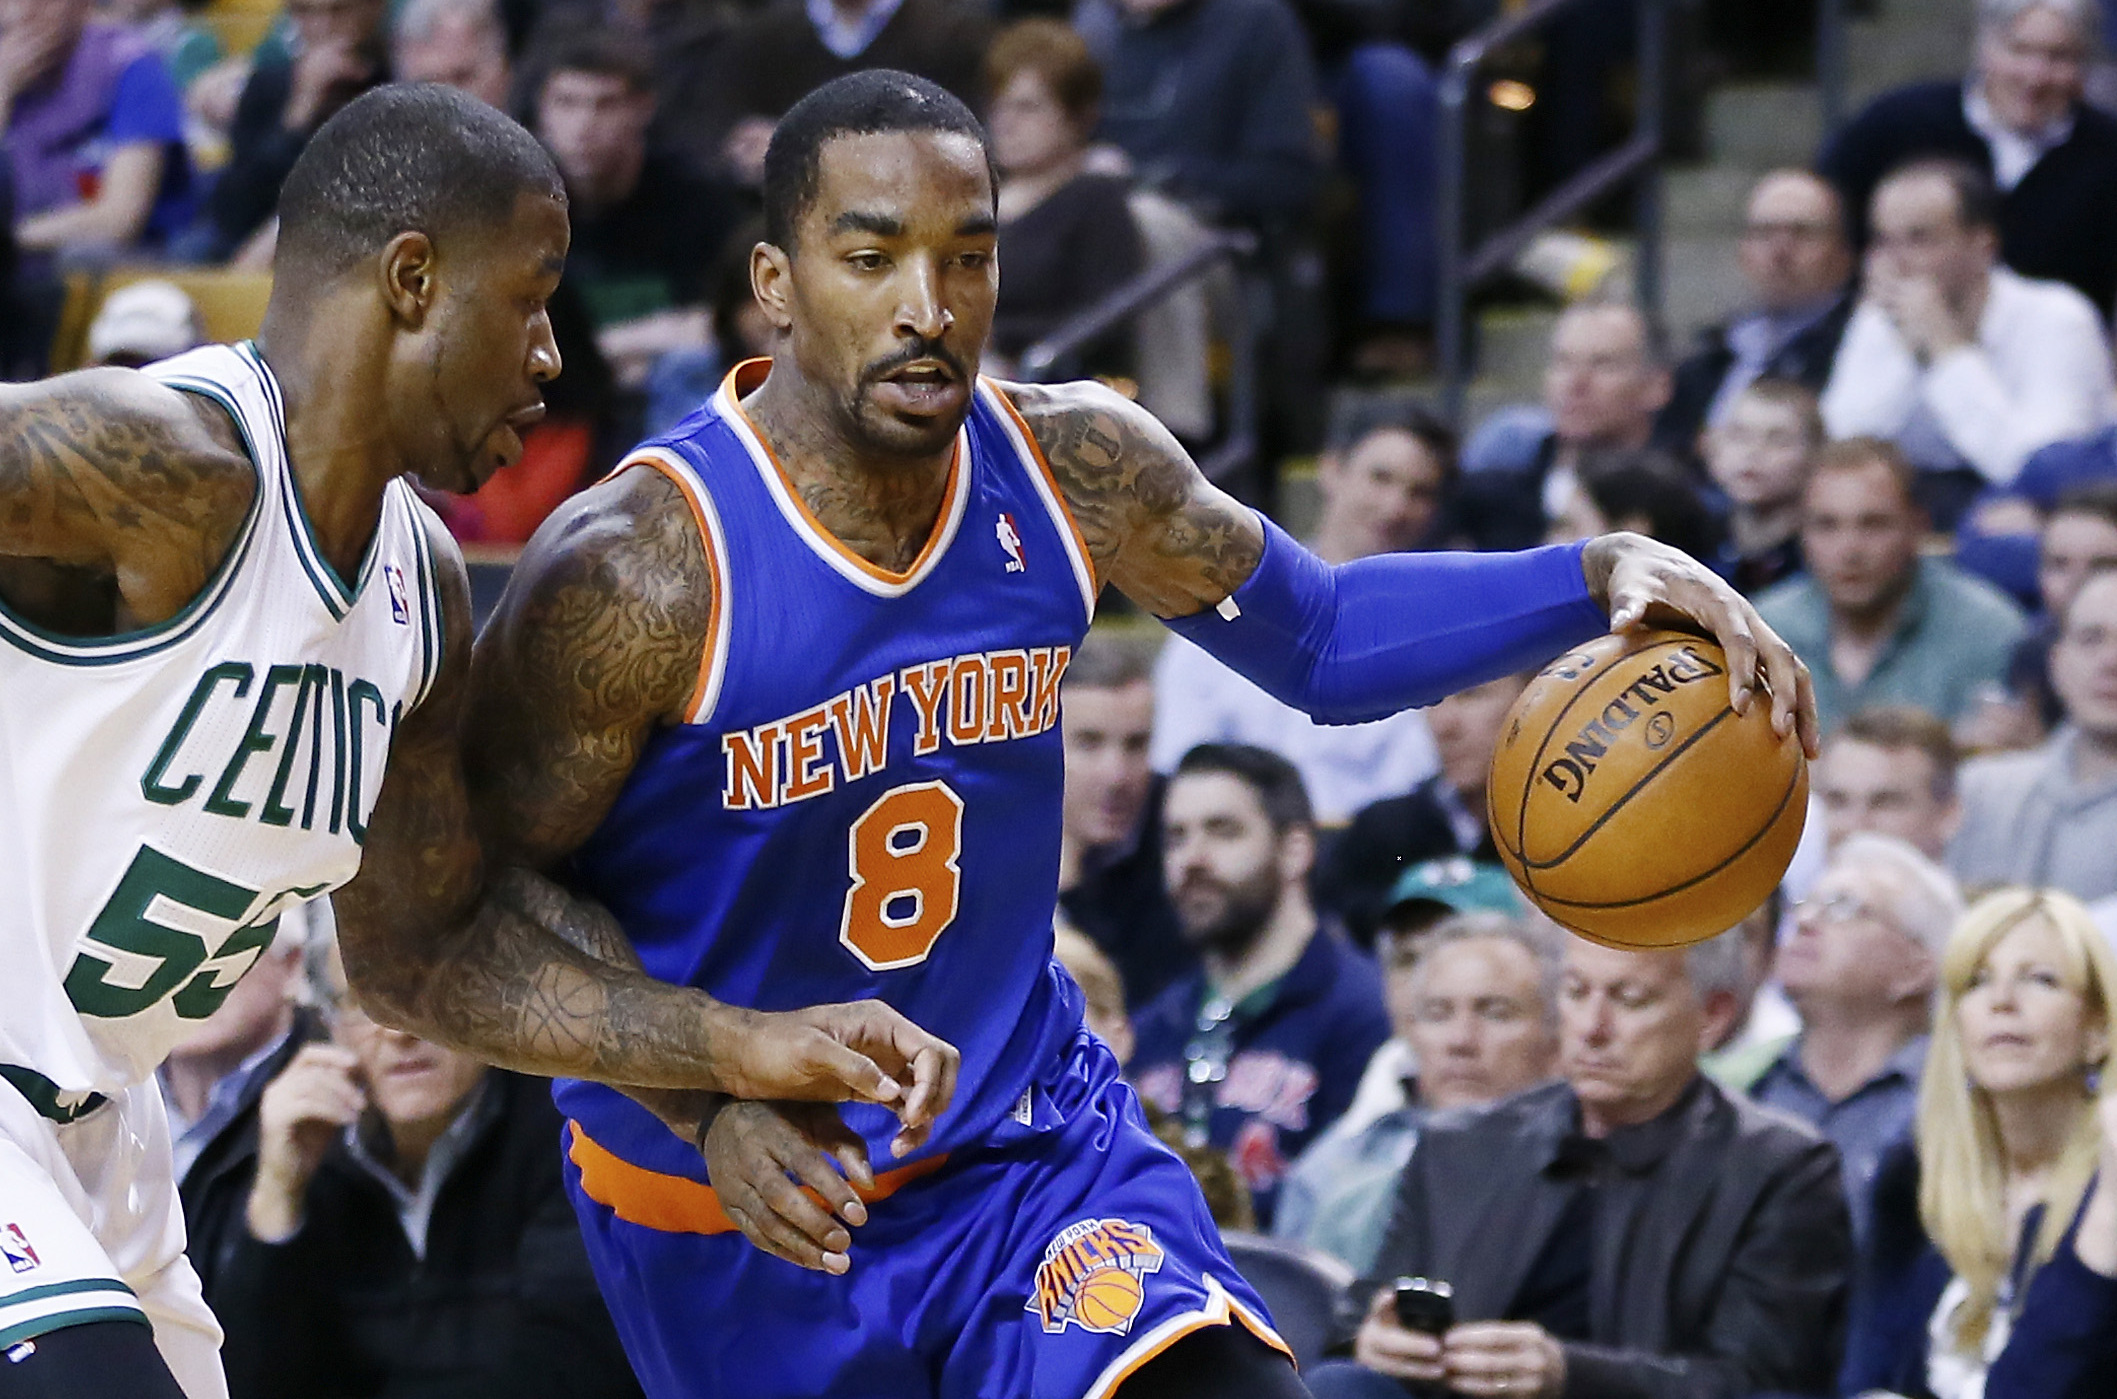 J.R. Smith worked out for the Cleveland Cavaliers prior to 2004 NBA Draft